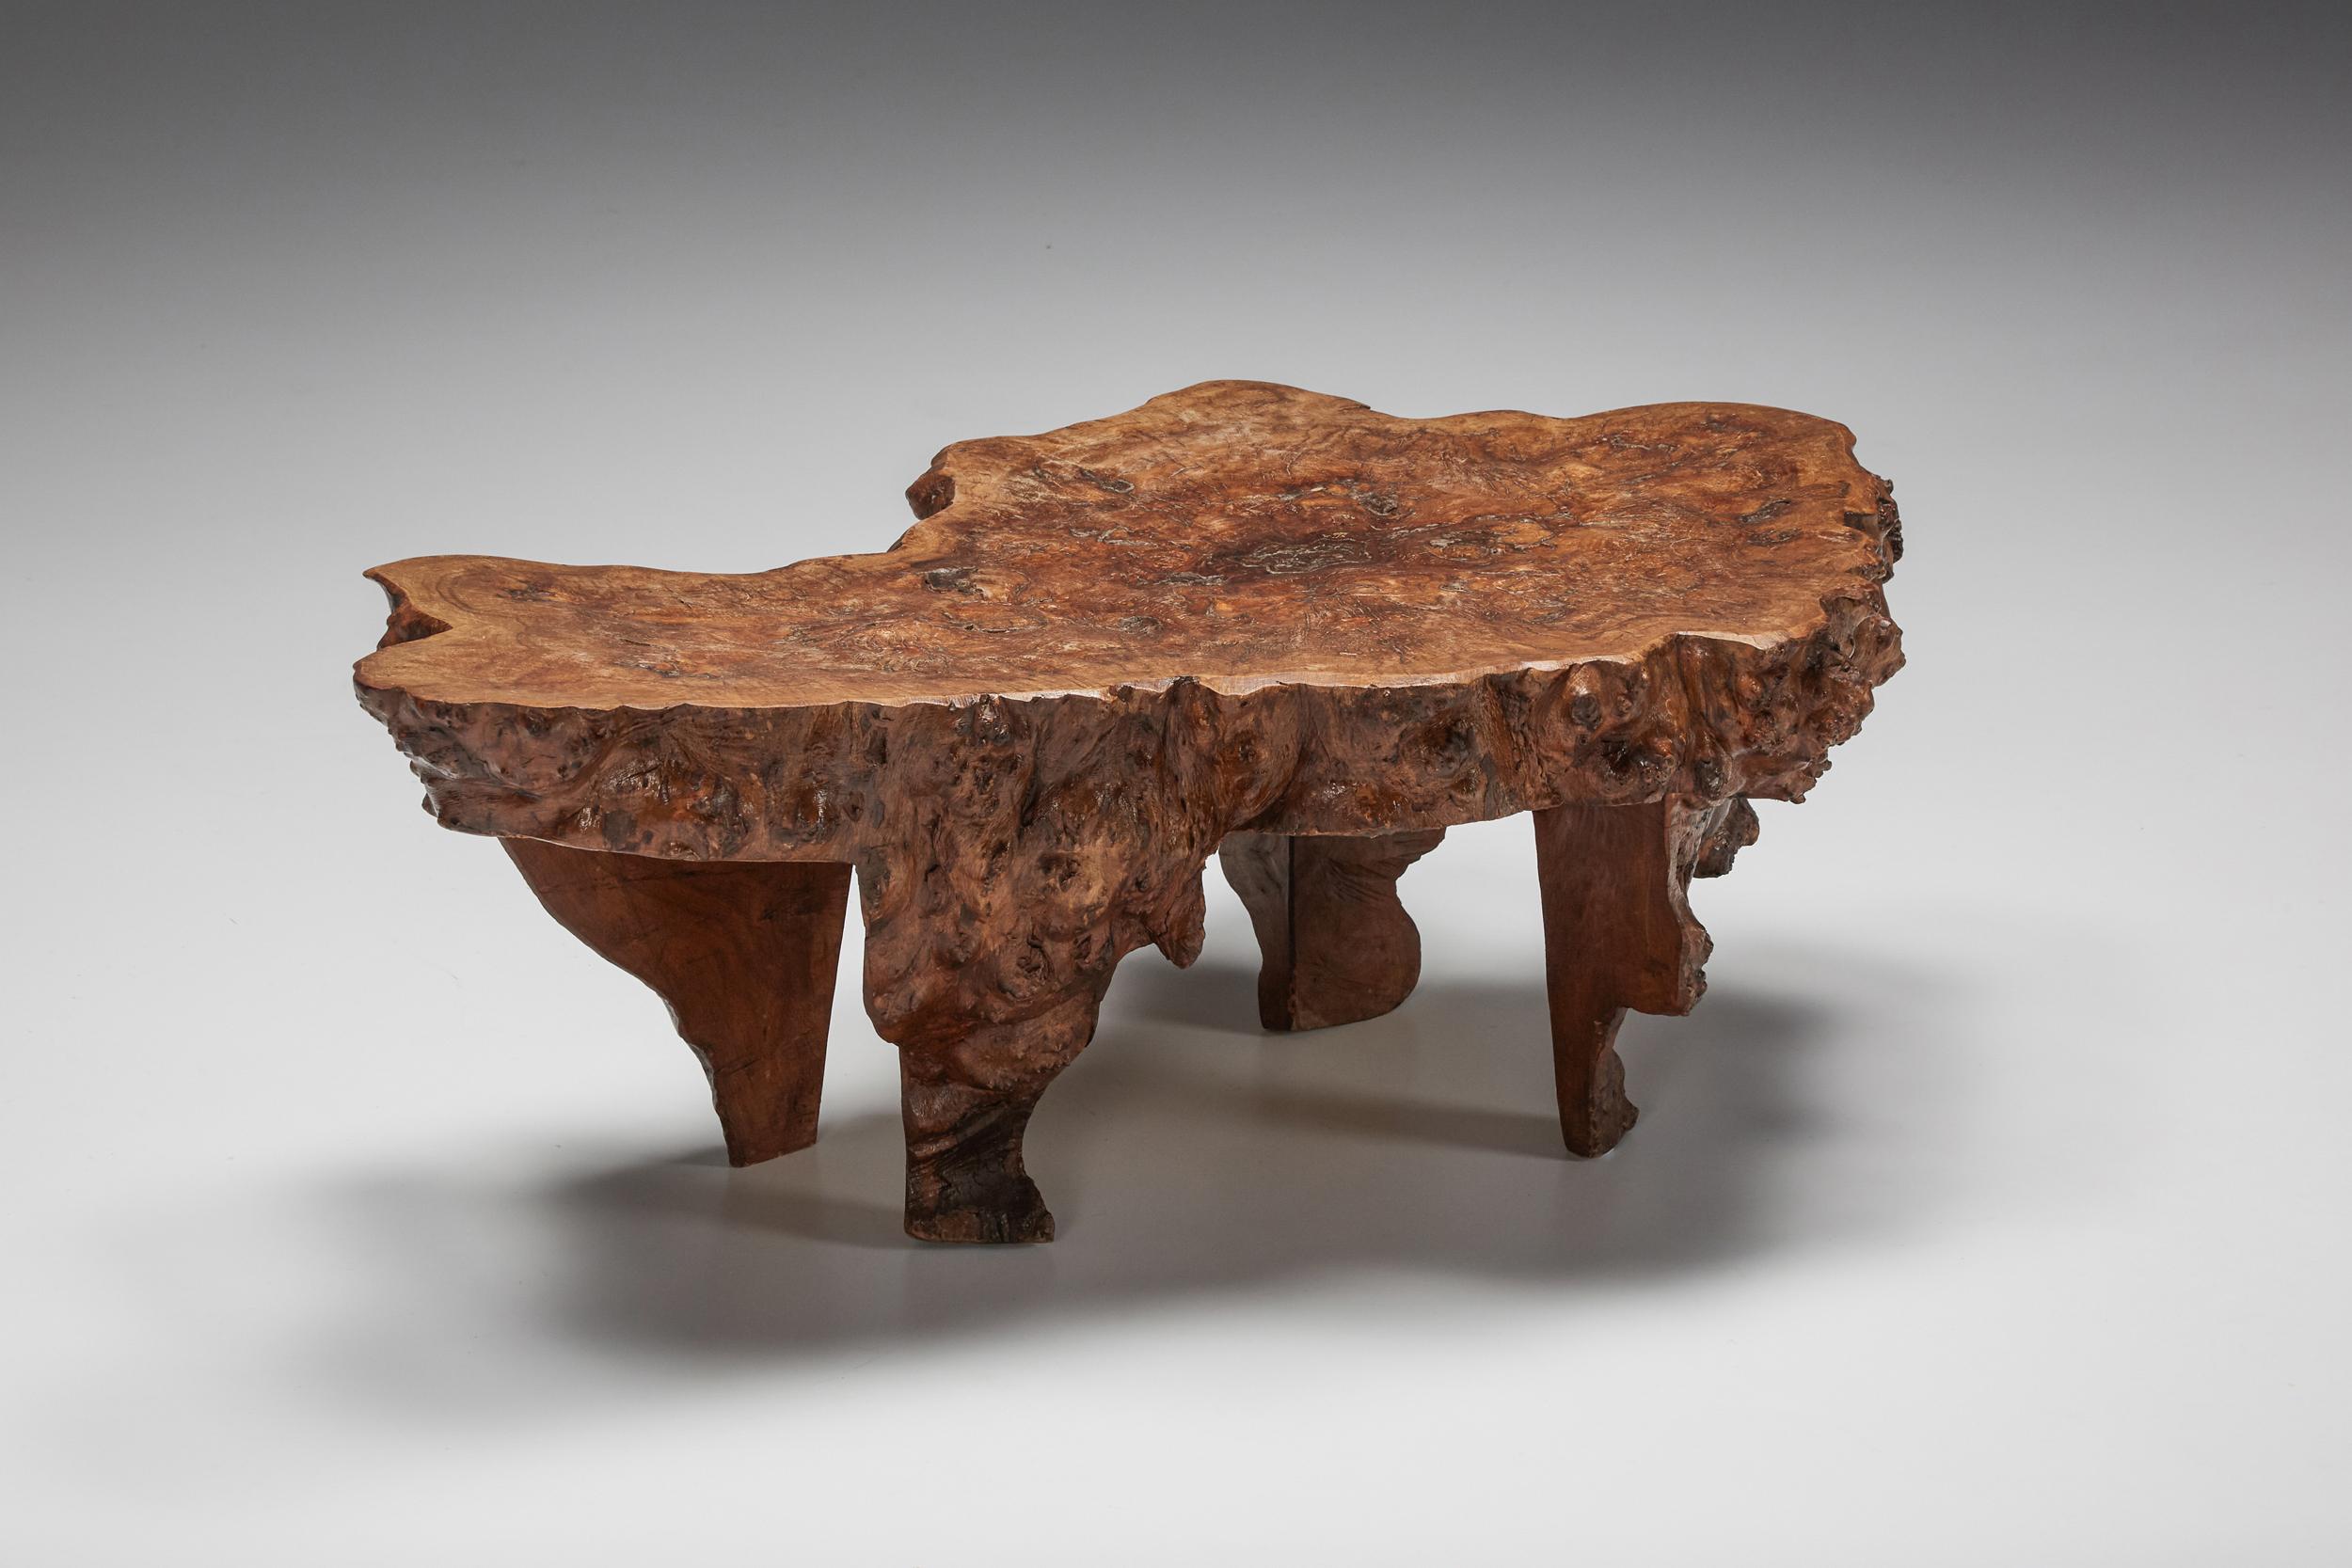 Burl wood coffee table Wabi-Sabi, Japanese Design, mid-19th century. 

This wooden chair perfectly embodies the enduring Japanese concept of 'wabi-sabi'. Made from an ancient piece of wood characterized by significant fissures and gaps, the artist